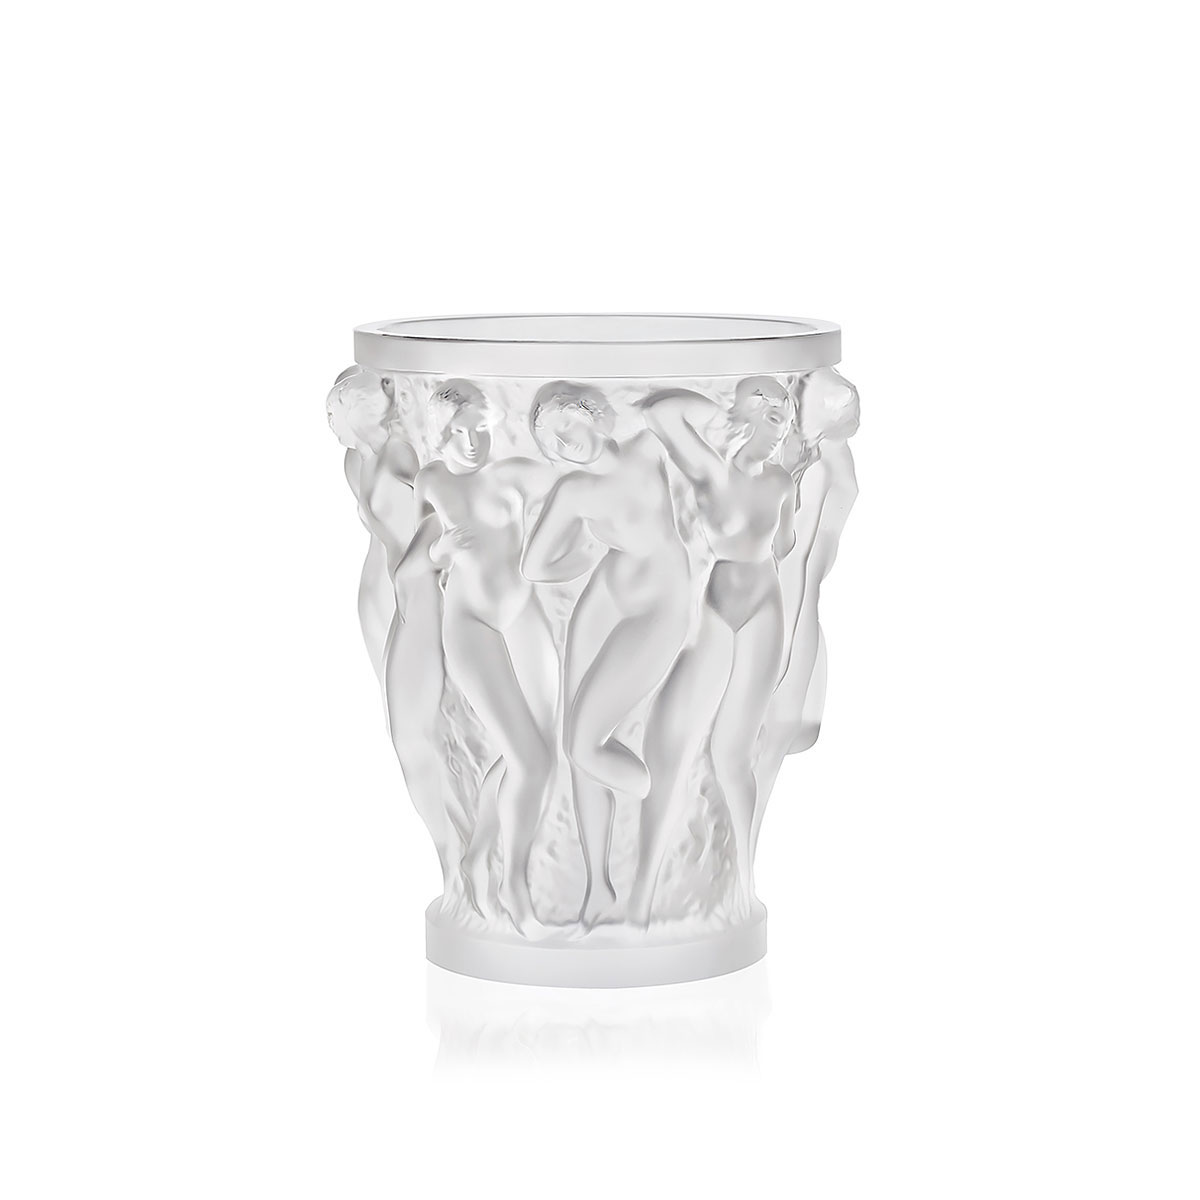 Lalique Crystal Vases Collection | Cashs of Ireland